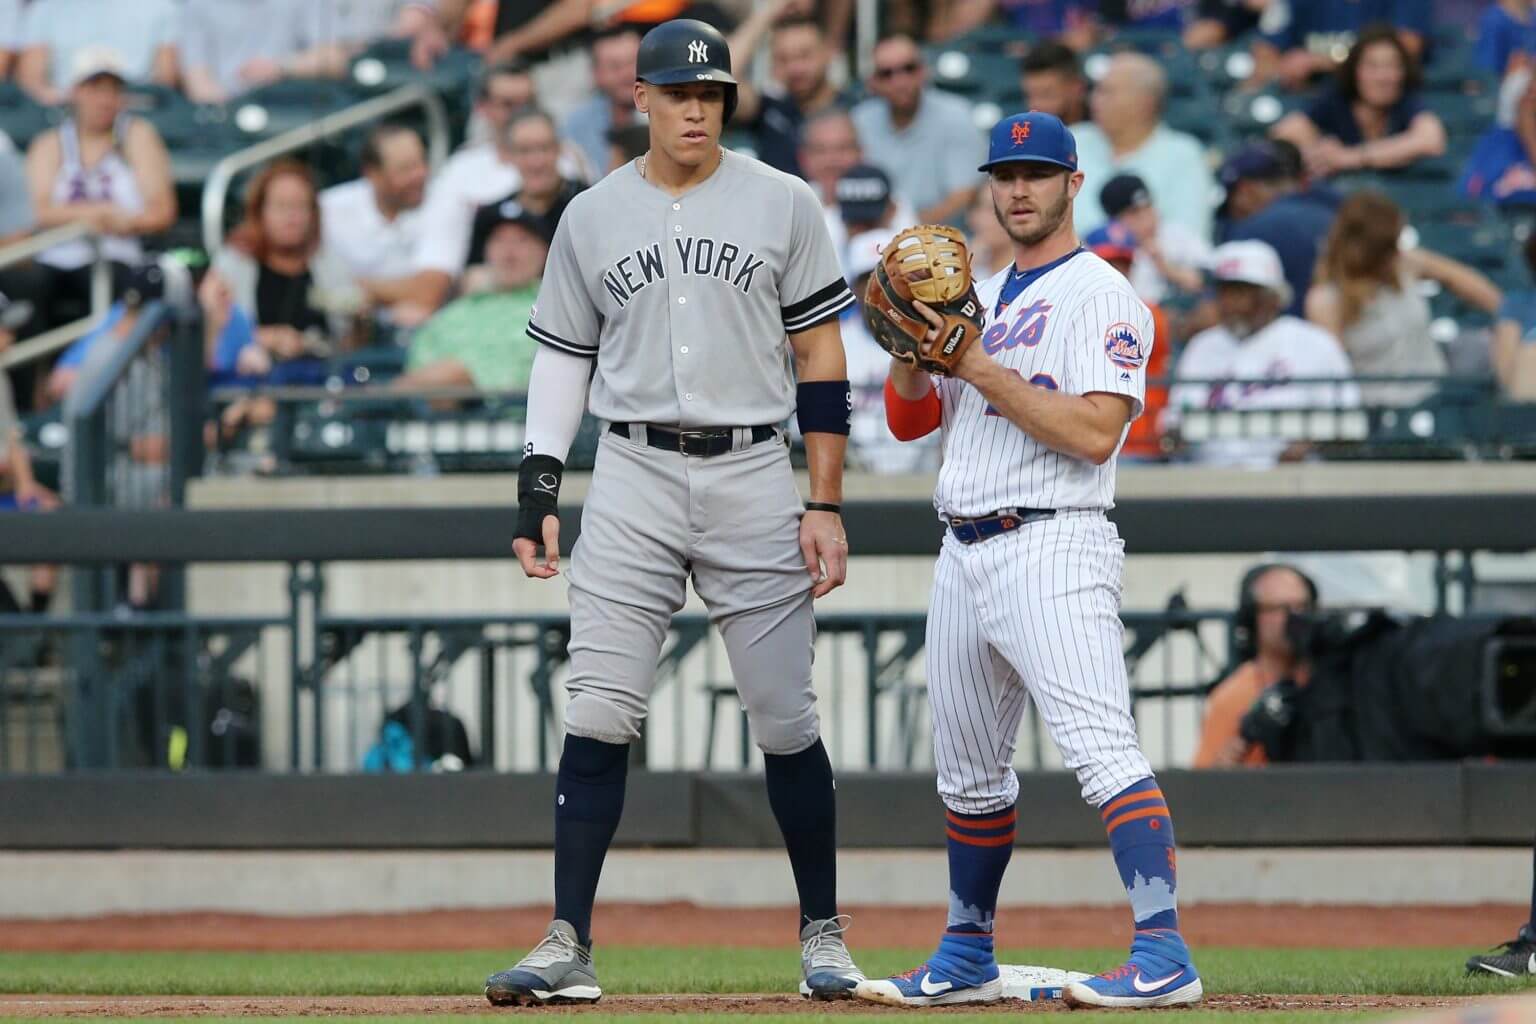 Yankees and Mets face off in Subway Series on September 11 – Bronx